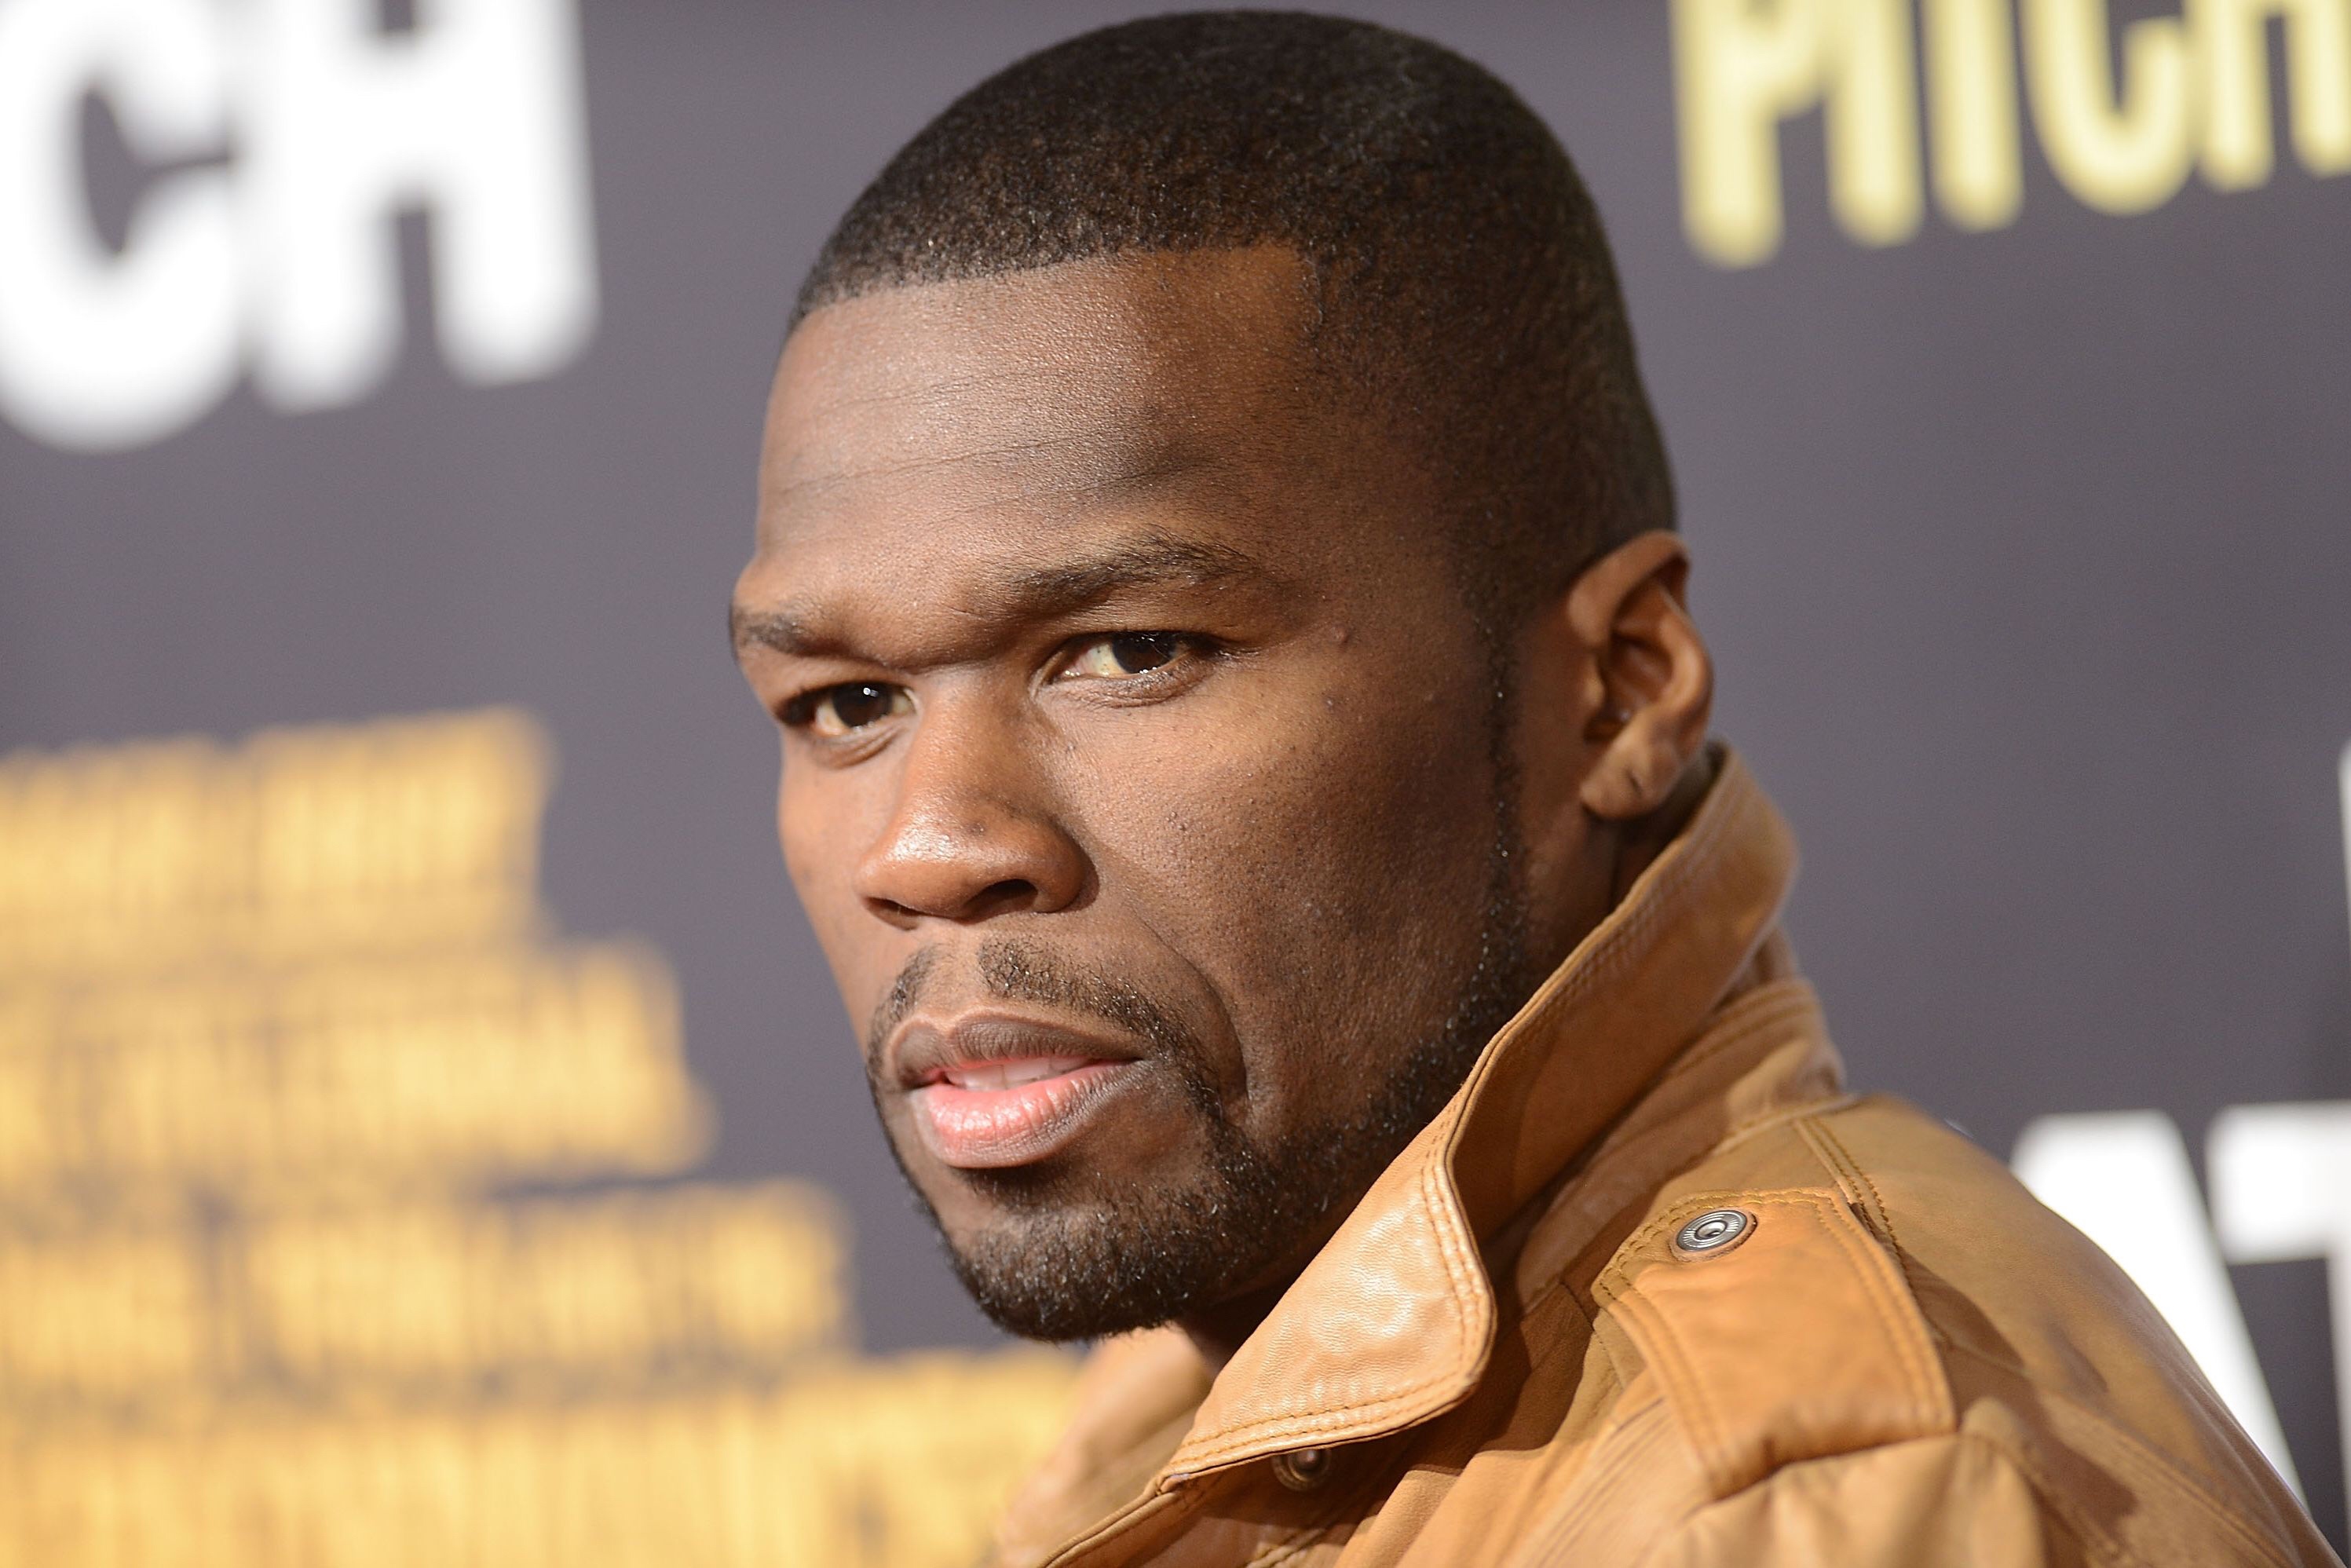 Per bankruptcy documents, 50 Cent admits he never actually owned any bitcoin